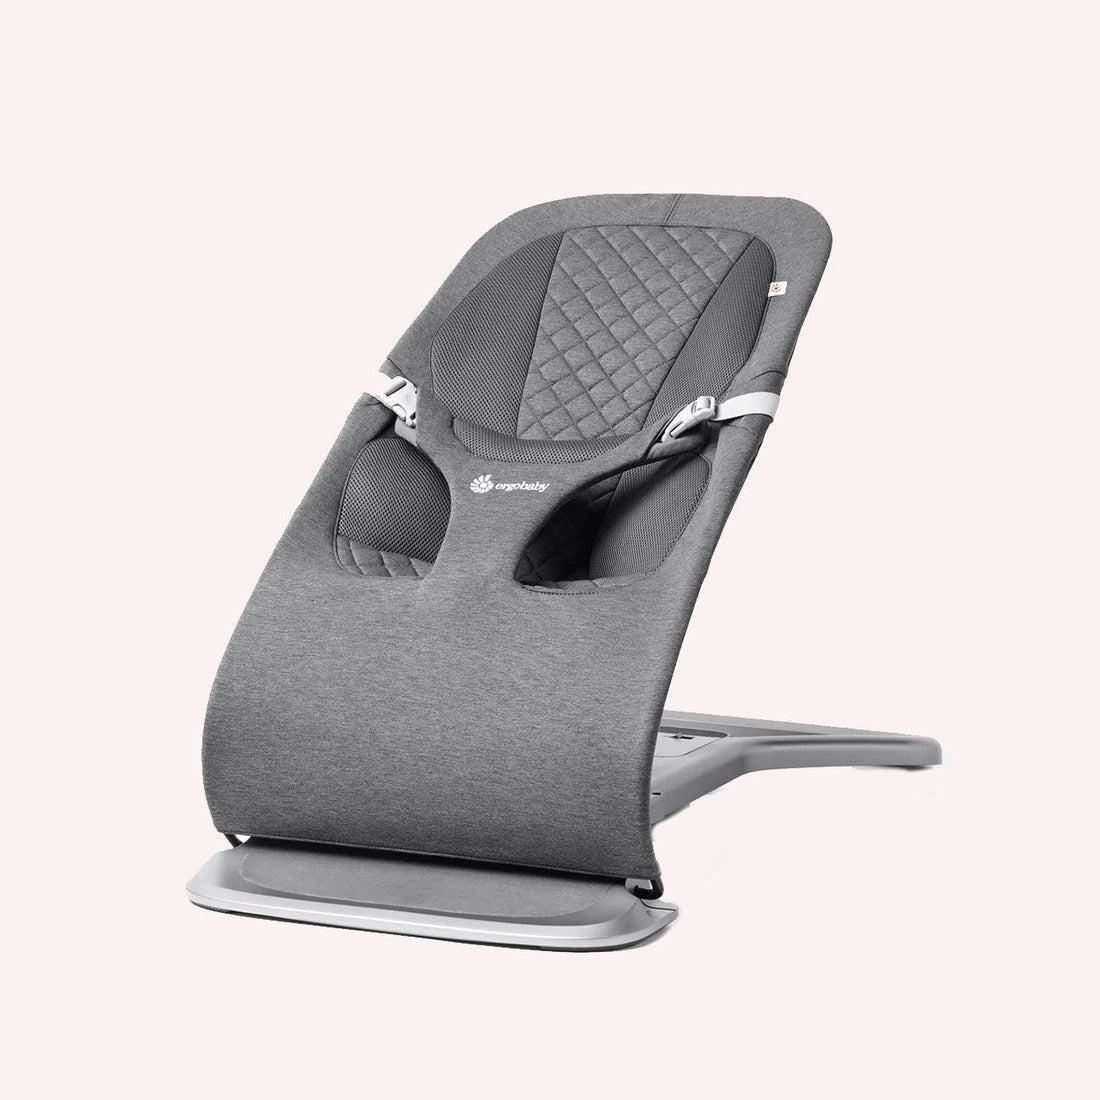 Evolve 3 in 1 Bouncer - Charcoal Grey